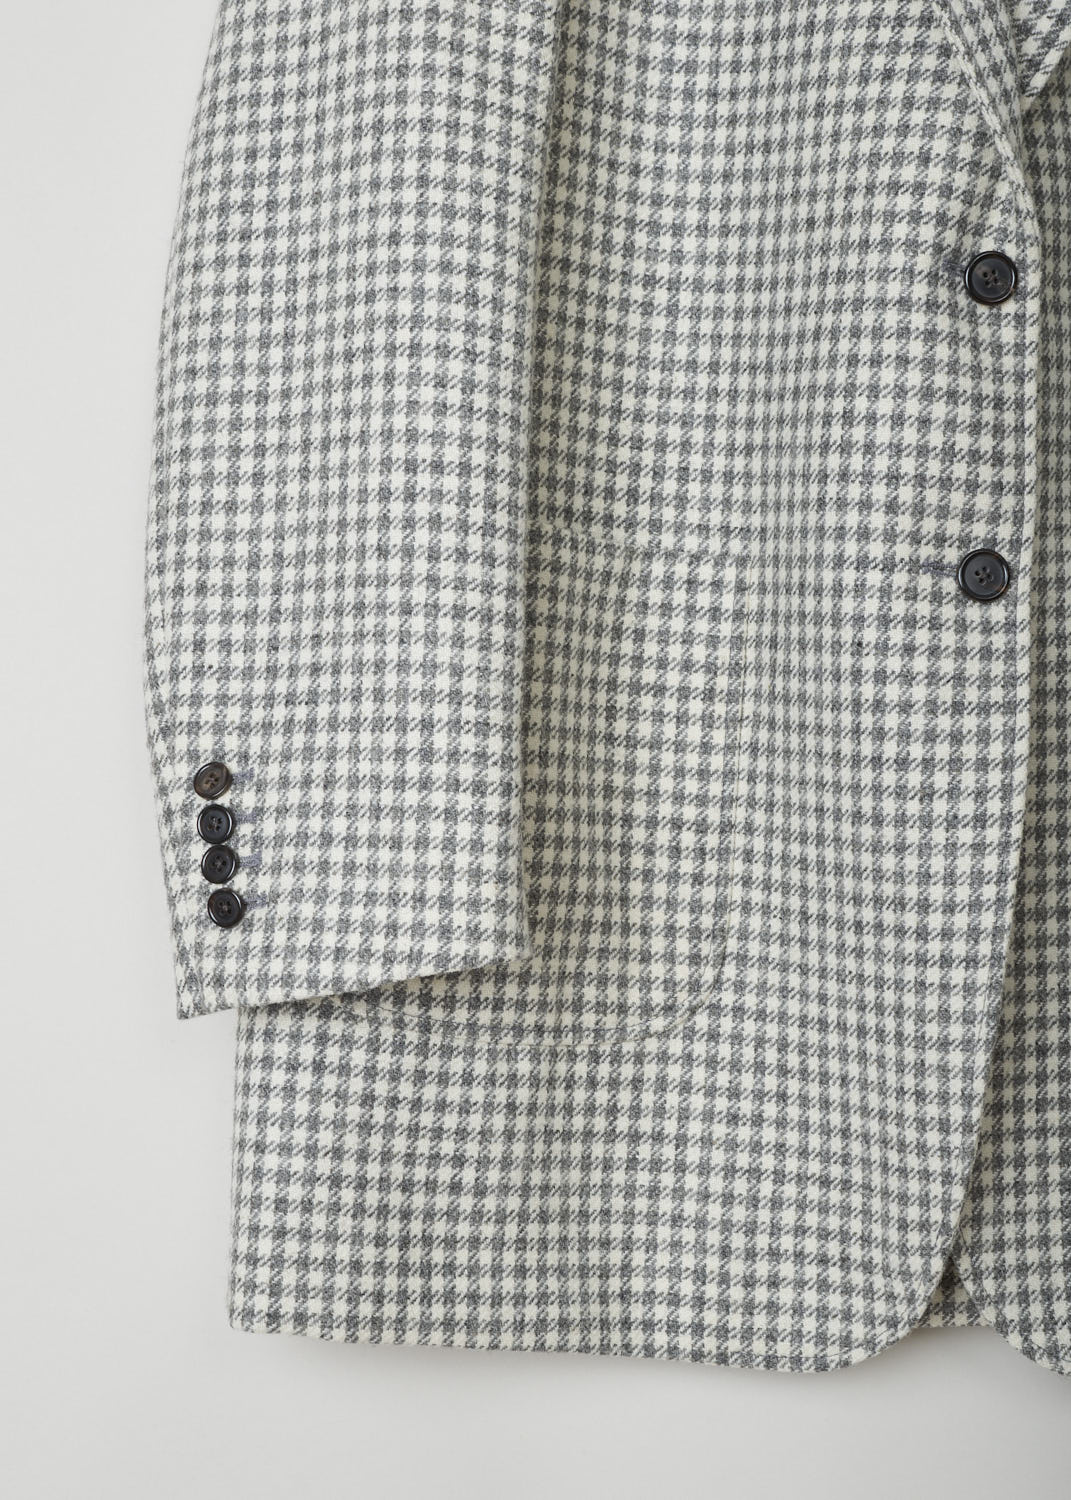 THOM BROWNE, OVERSIZED BLAZER IN HOUNDSTOOTH, FBC500A_06842_035_MED_GREY, Print, Detail, Classic Houndstooth printed oversized blazer. This single breasted blazer features a notched lapel and a front button closure. The blazer has a single chest pocket, two patch pockets and three inner pockets. The long sleeves have buttoned cuffs. In the back, a centre slit can be found. 
